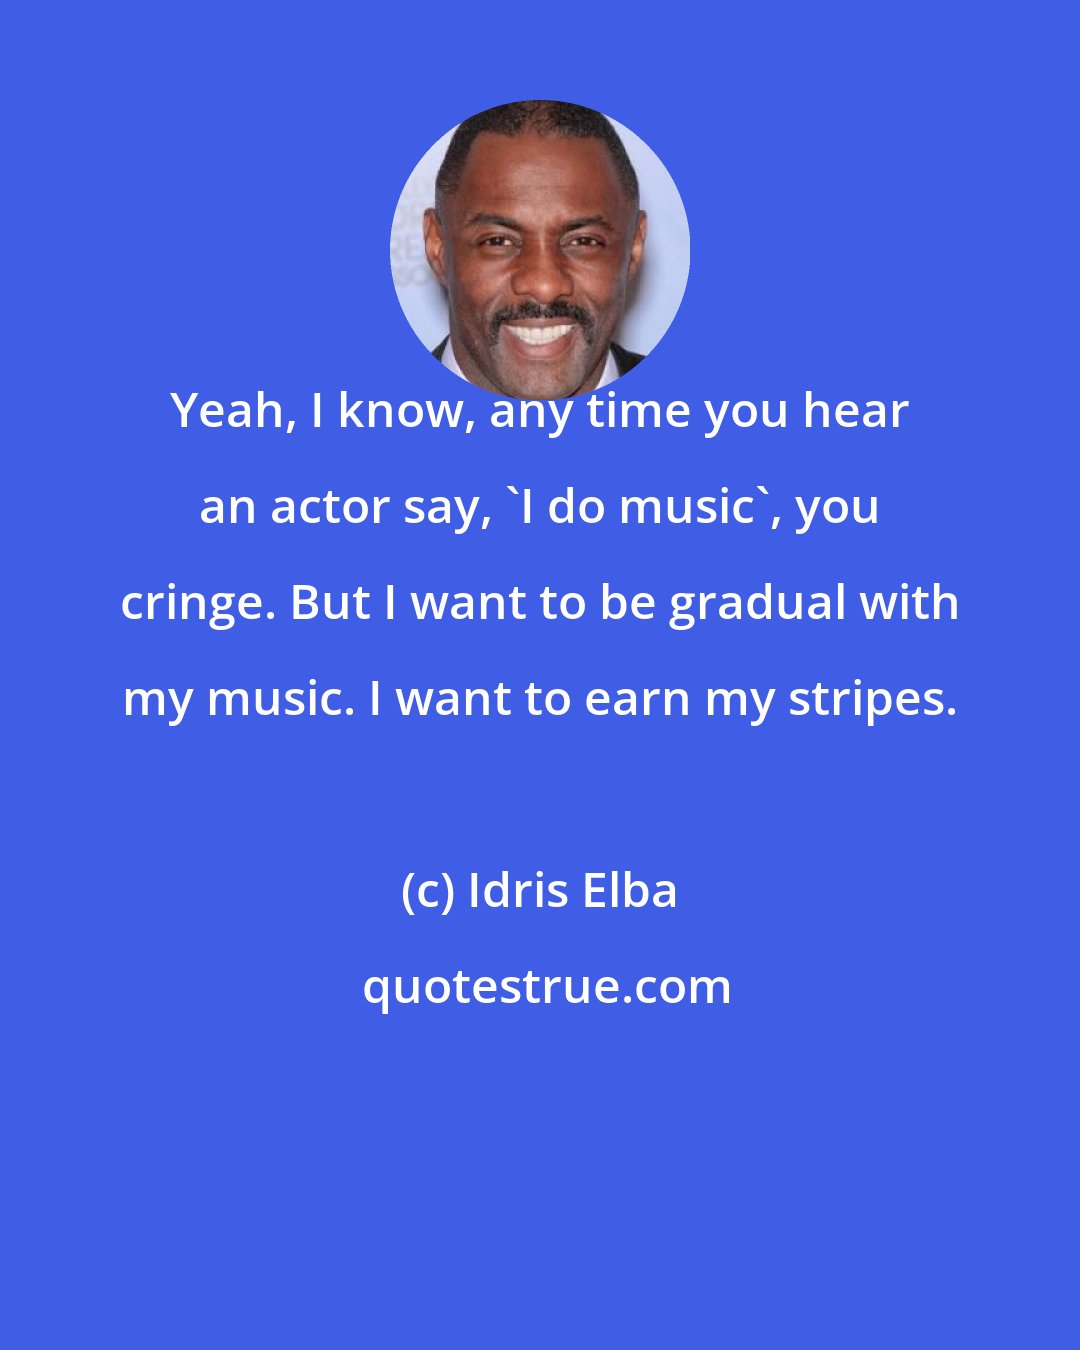 Idris Elba: Yeah, I know, any time you hear an actor say, 'I do music', you cringe. But I want to be gradual with my music. I want to earn my stripes.